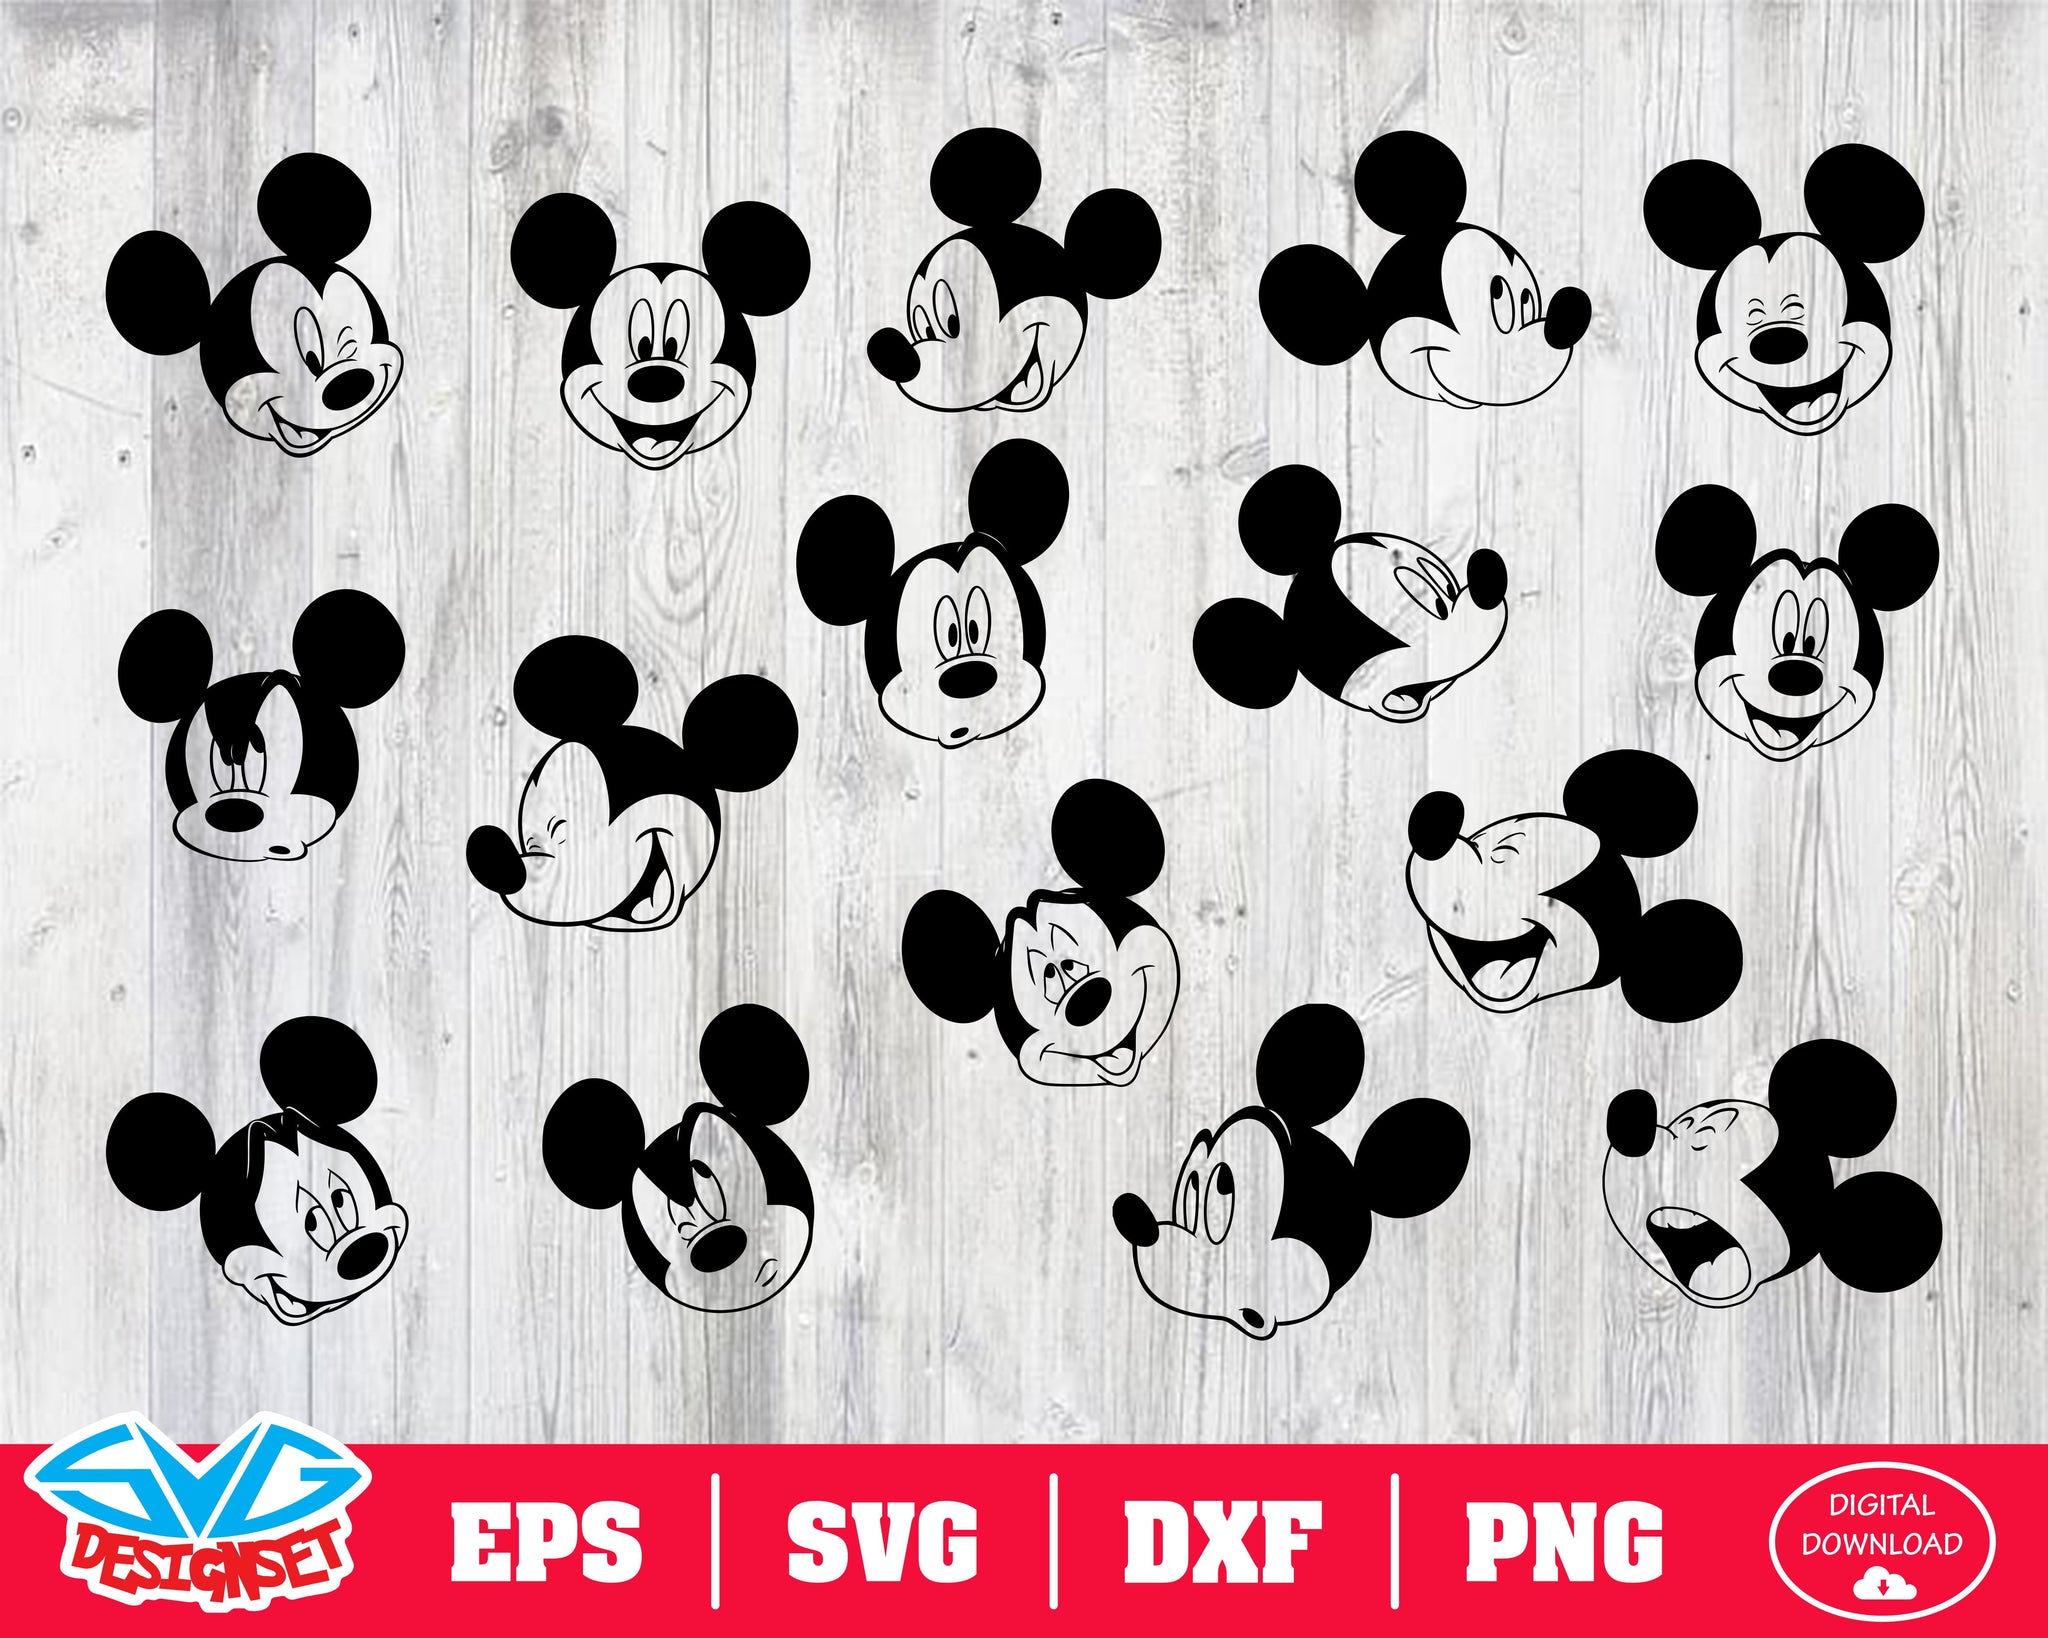 Mickey head Svg, Dxf, Eps, Png, Clipart, Silhouette and Cutfiles #2 - SVGDesignSets